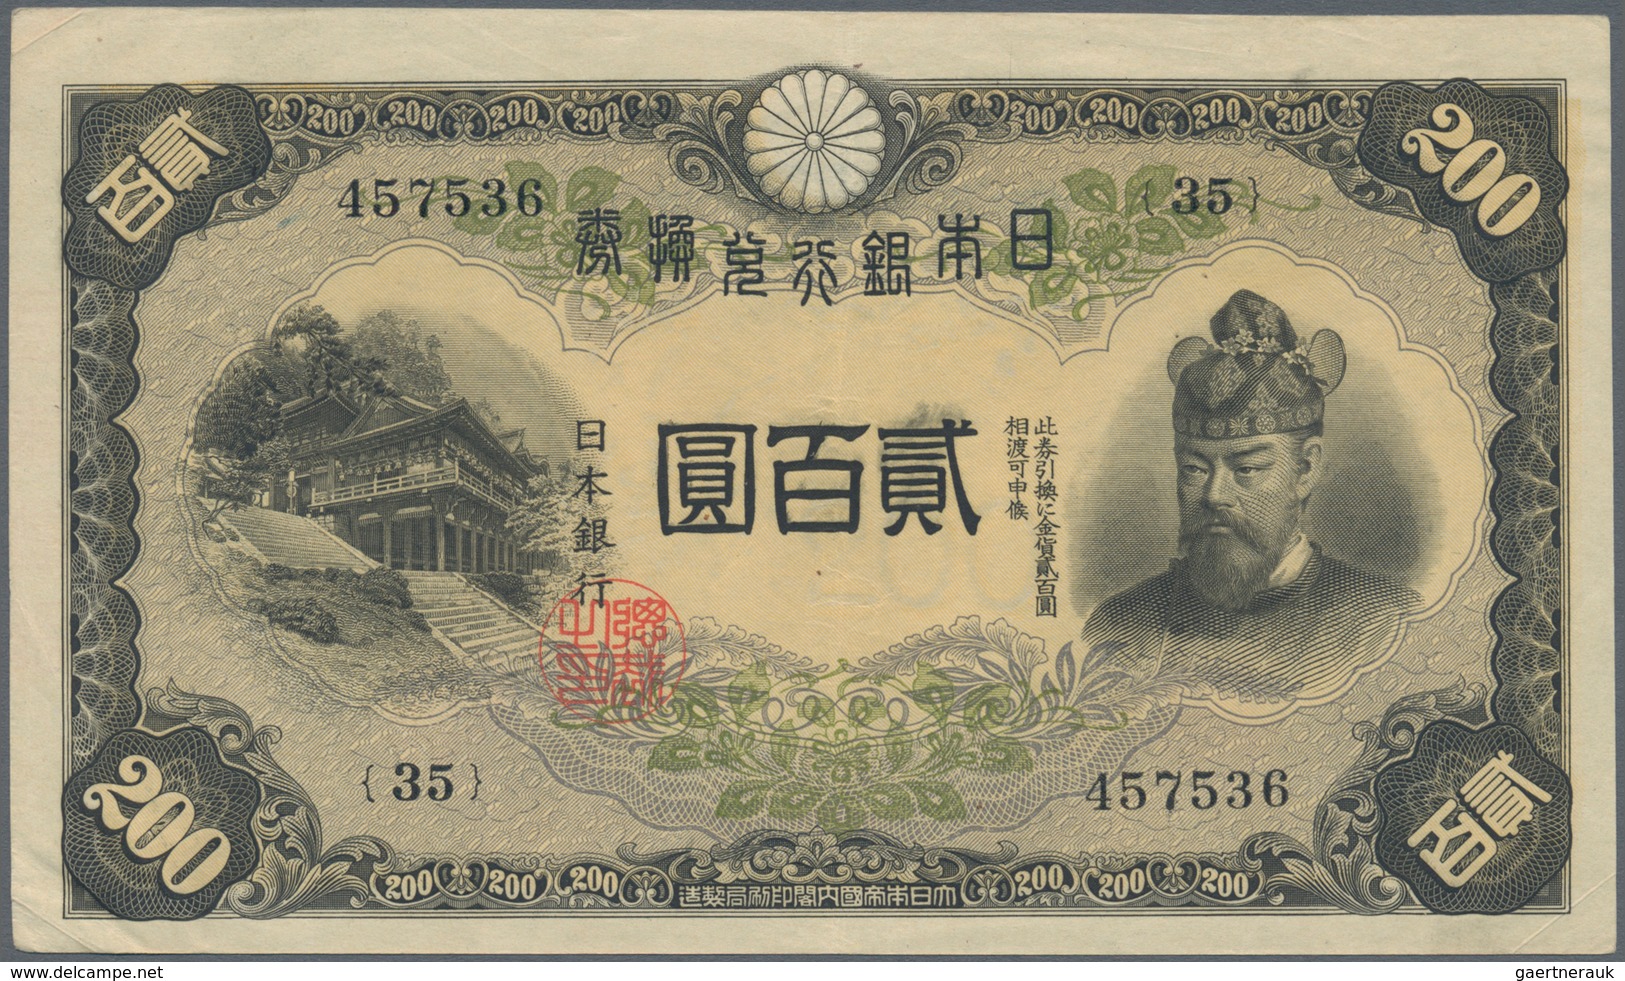 01892 Japan: 200 Yen ND P. 44a, Used With Center Fold, Light Creases In Paper But Very Crisp Original With - Japón